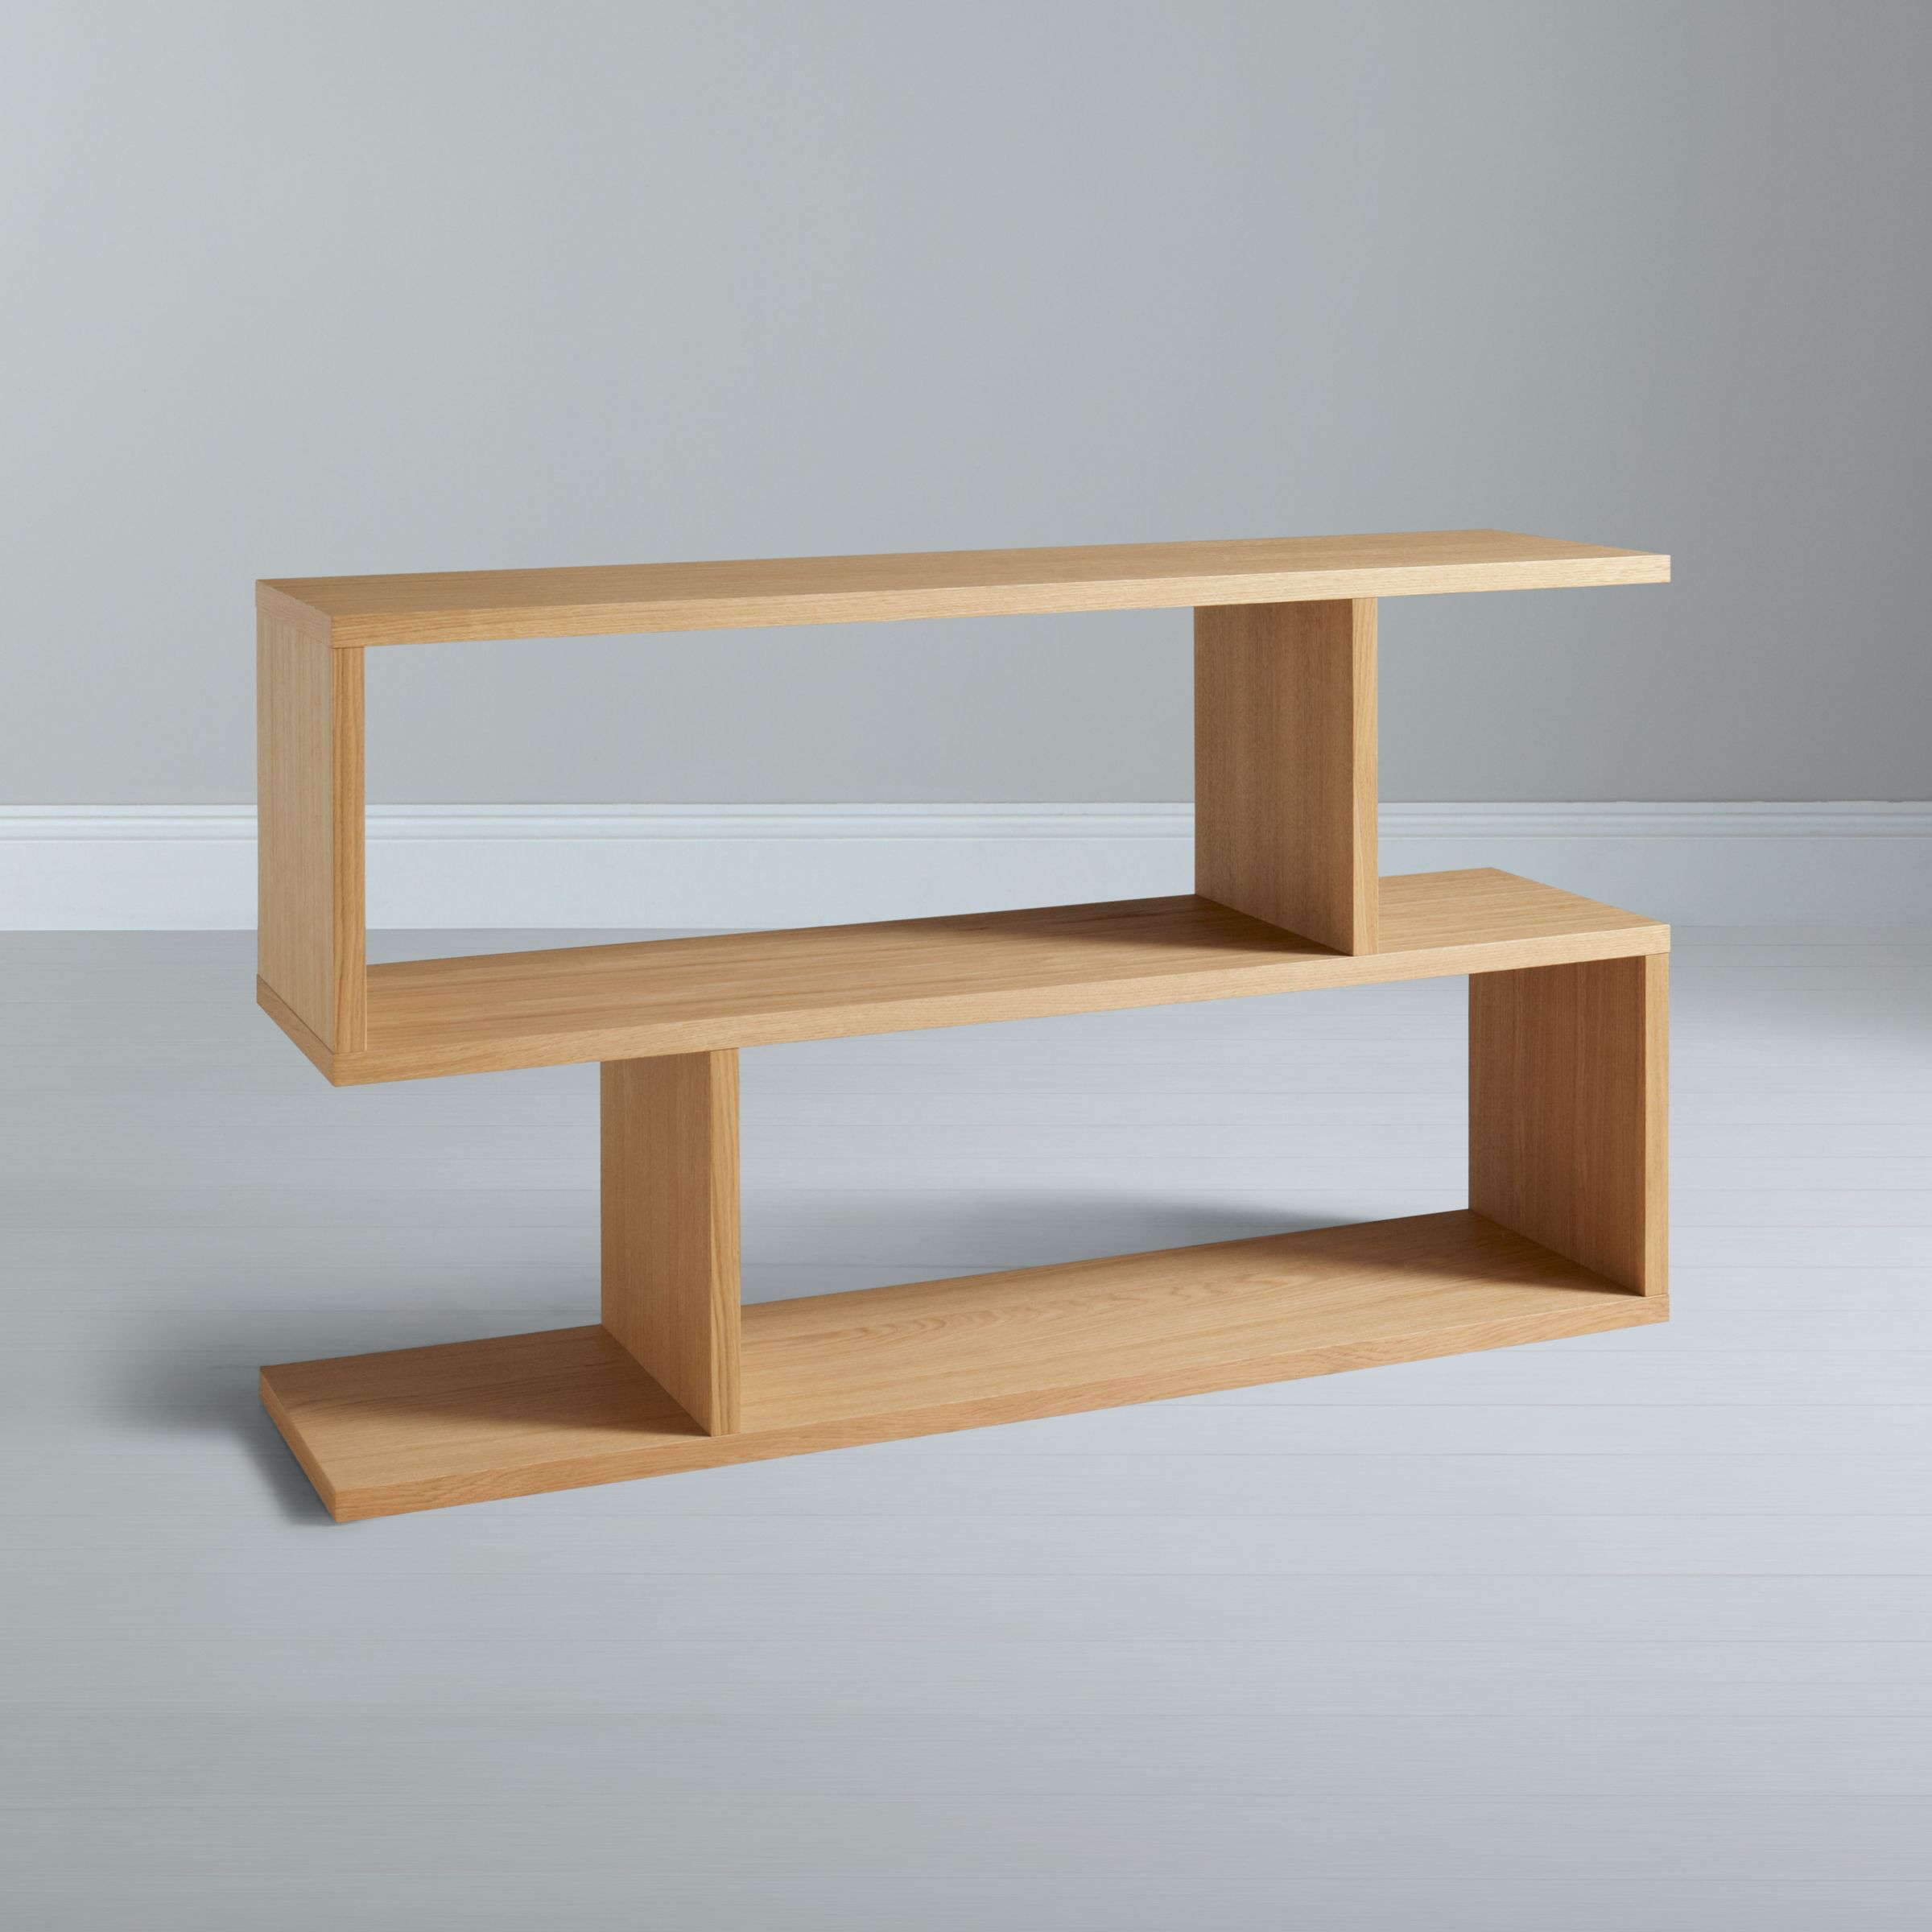 Content by Conran Balance Console Table/Low Shelving, Oak at John Lewis